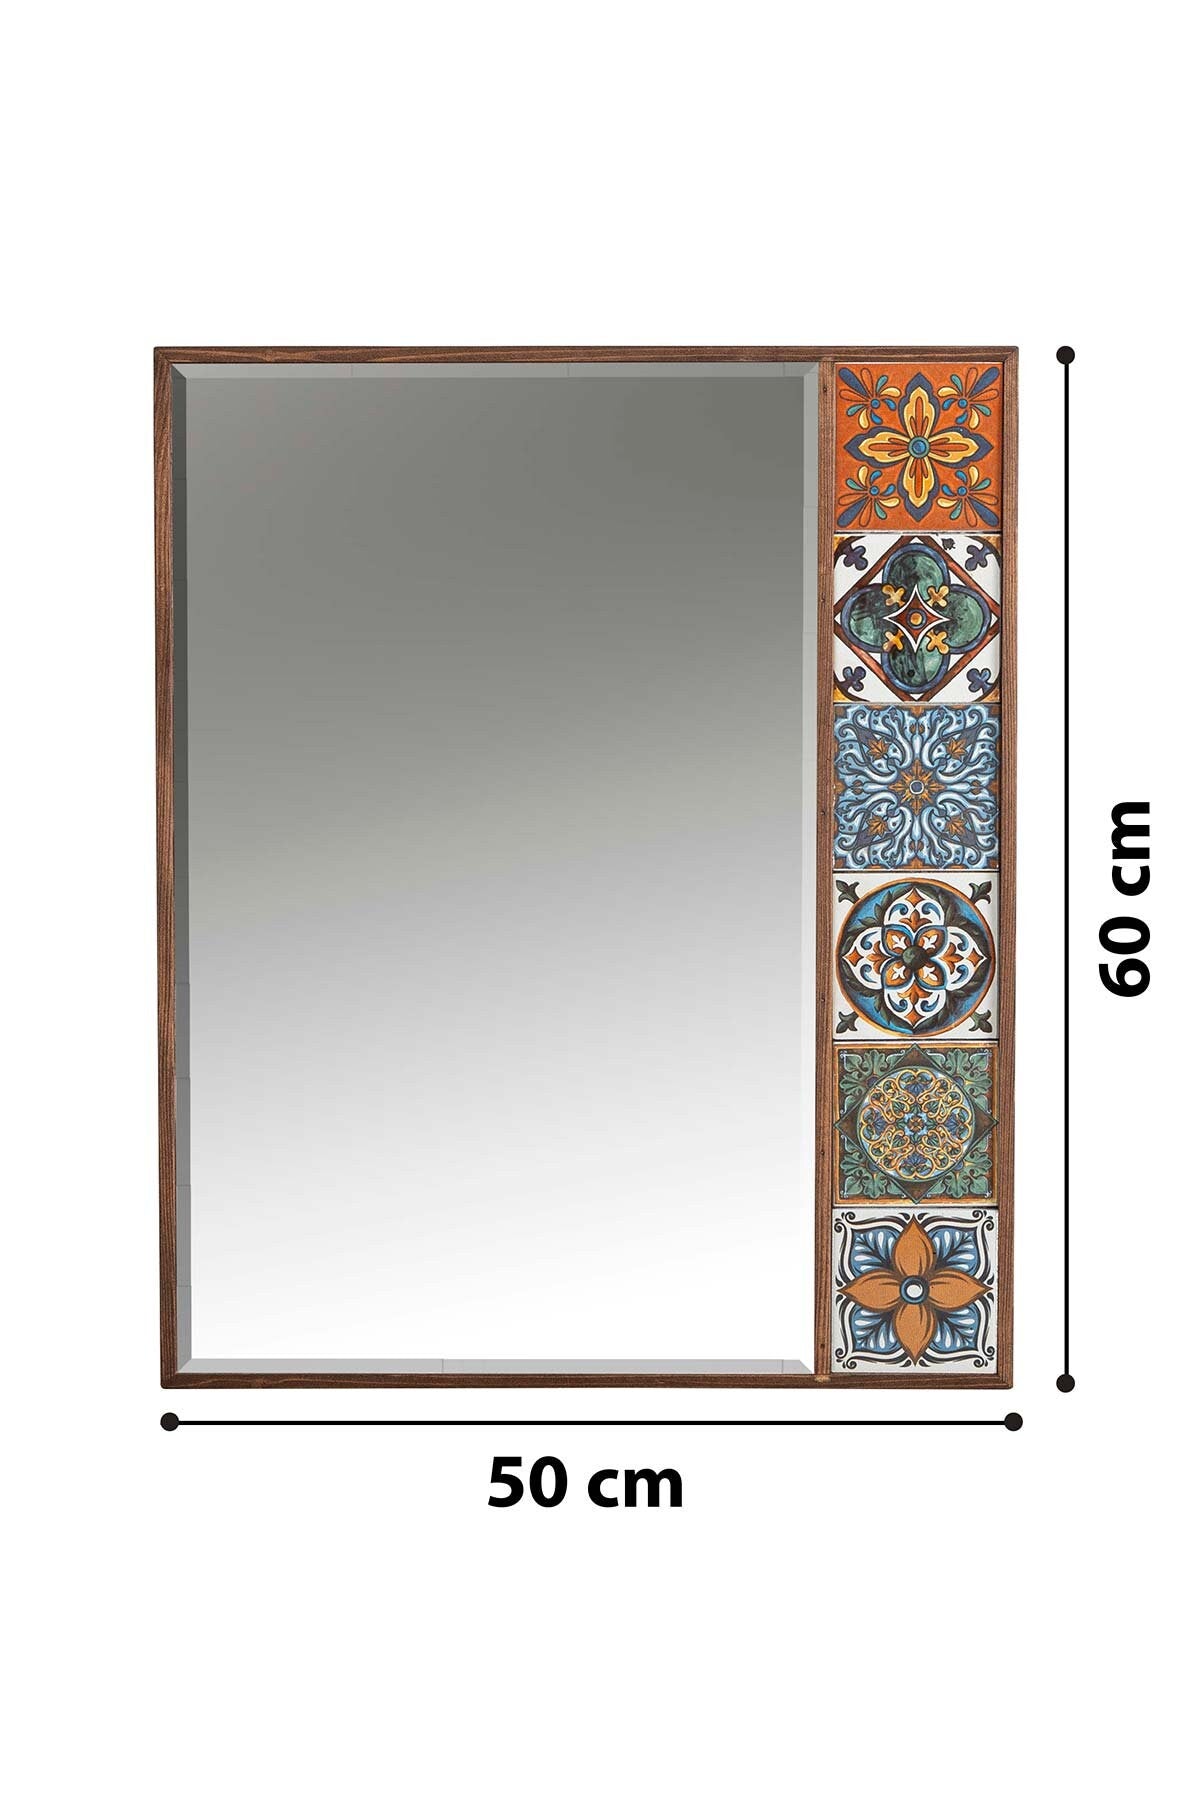 Artisan-Crafted Ceramic Mirror: Handmade Tiles, Real Wood Frame - Unique Home Decor Accent